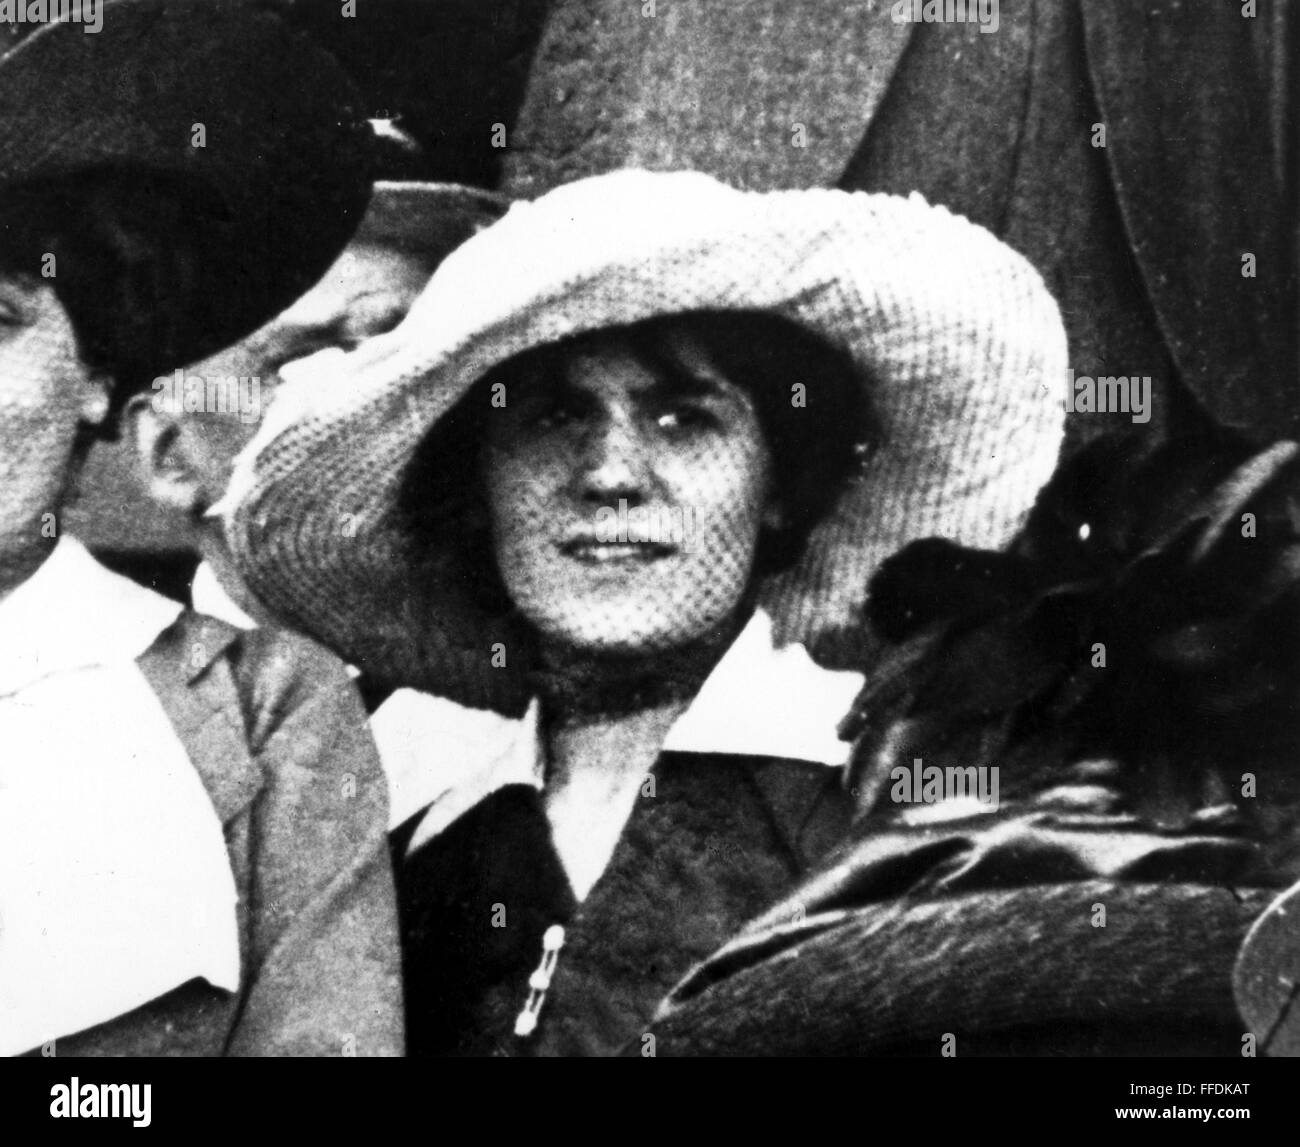 GABRIELLE 'COCO' CHANEL /n(1883-1971). French fashion designer. Photograph,  early 20th century Stock Photo - Alamy